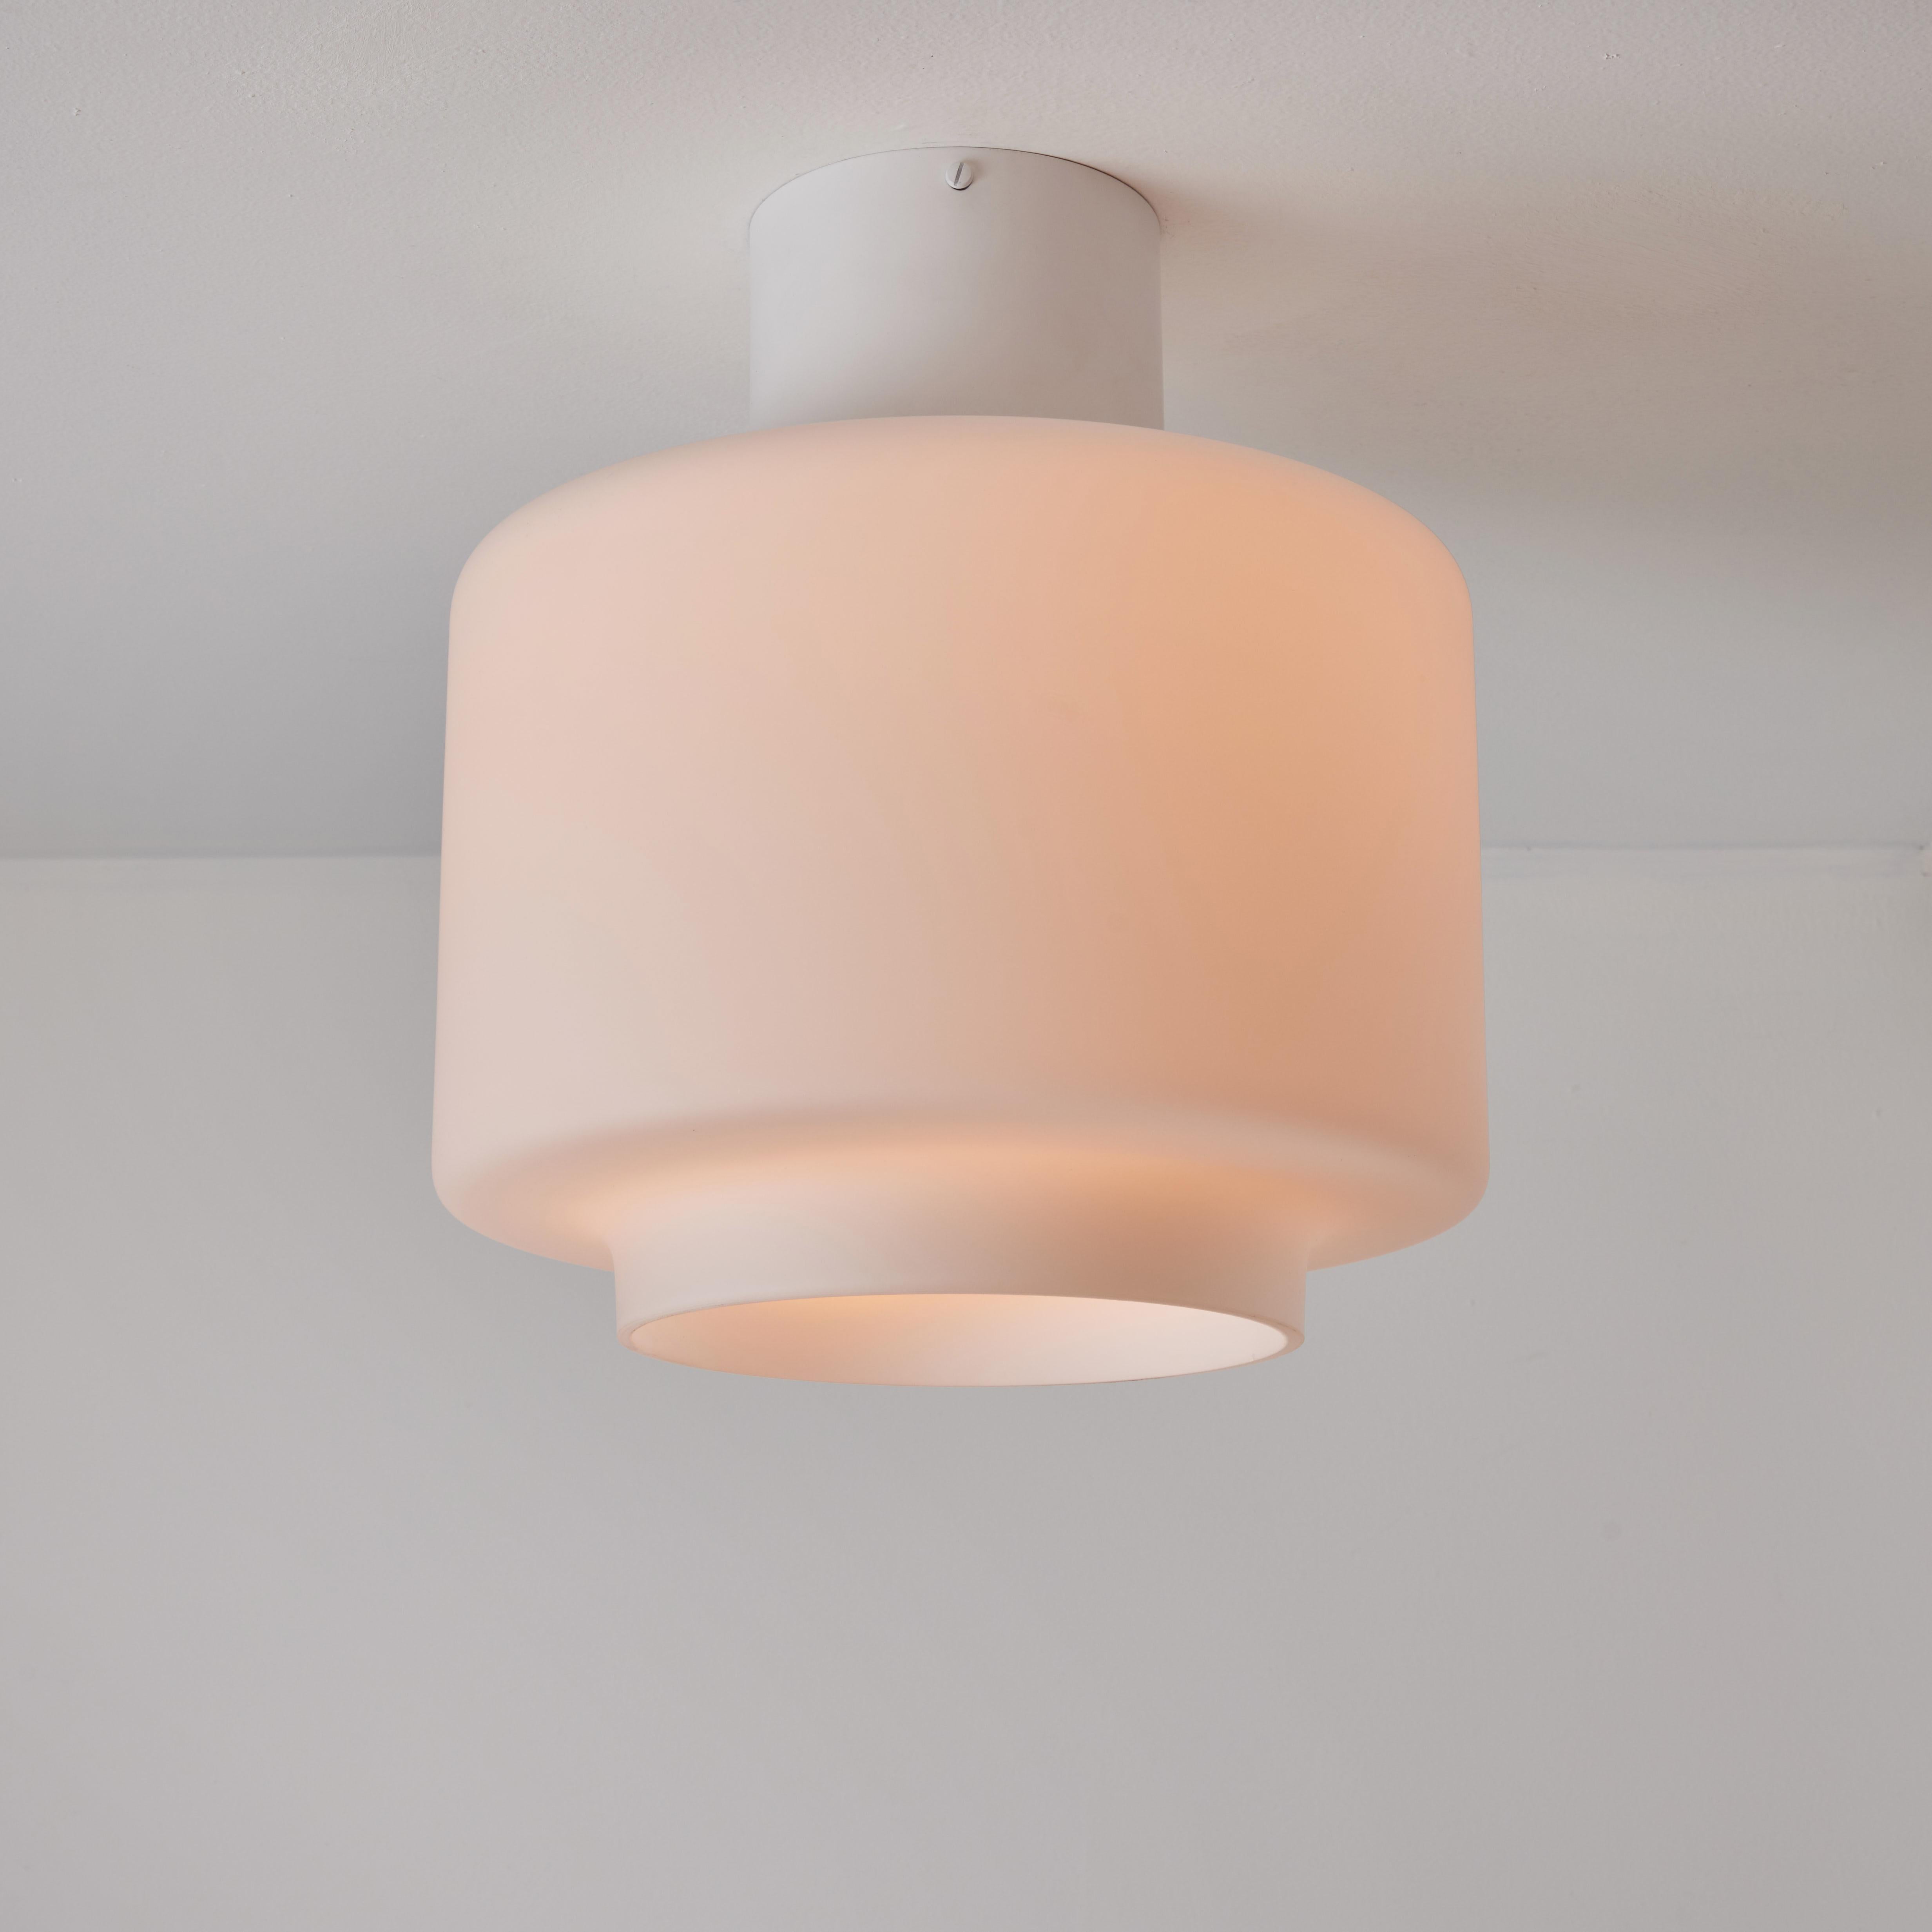 1960s Mauri Almari Opaline Glass and White Metal 'AE 88' Ceiling Lamp for Itsu In Good Condition For Sale In Glendale, CA